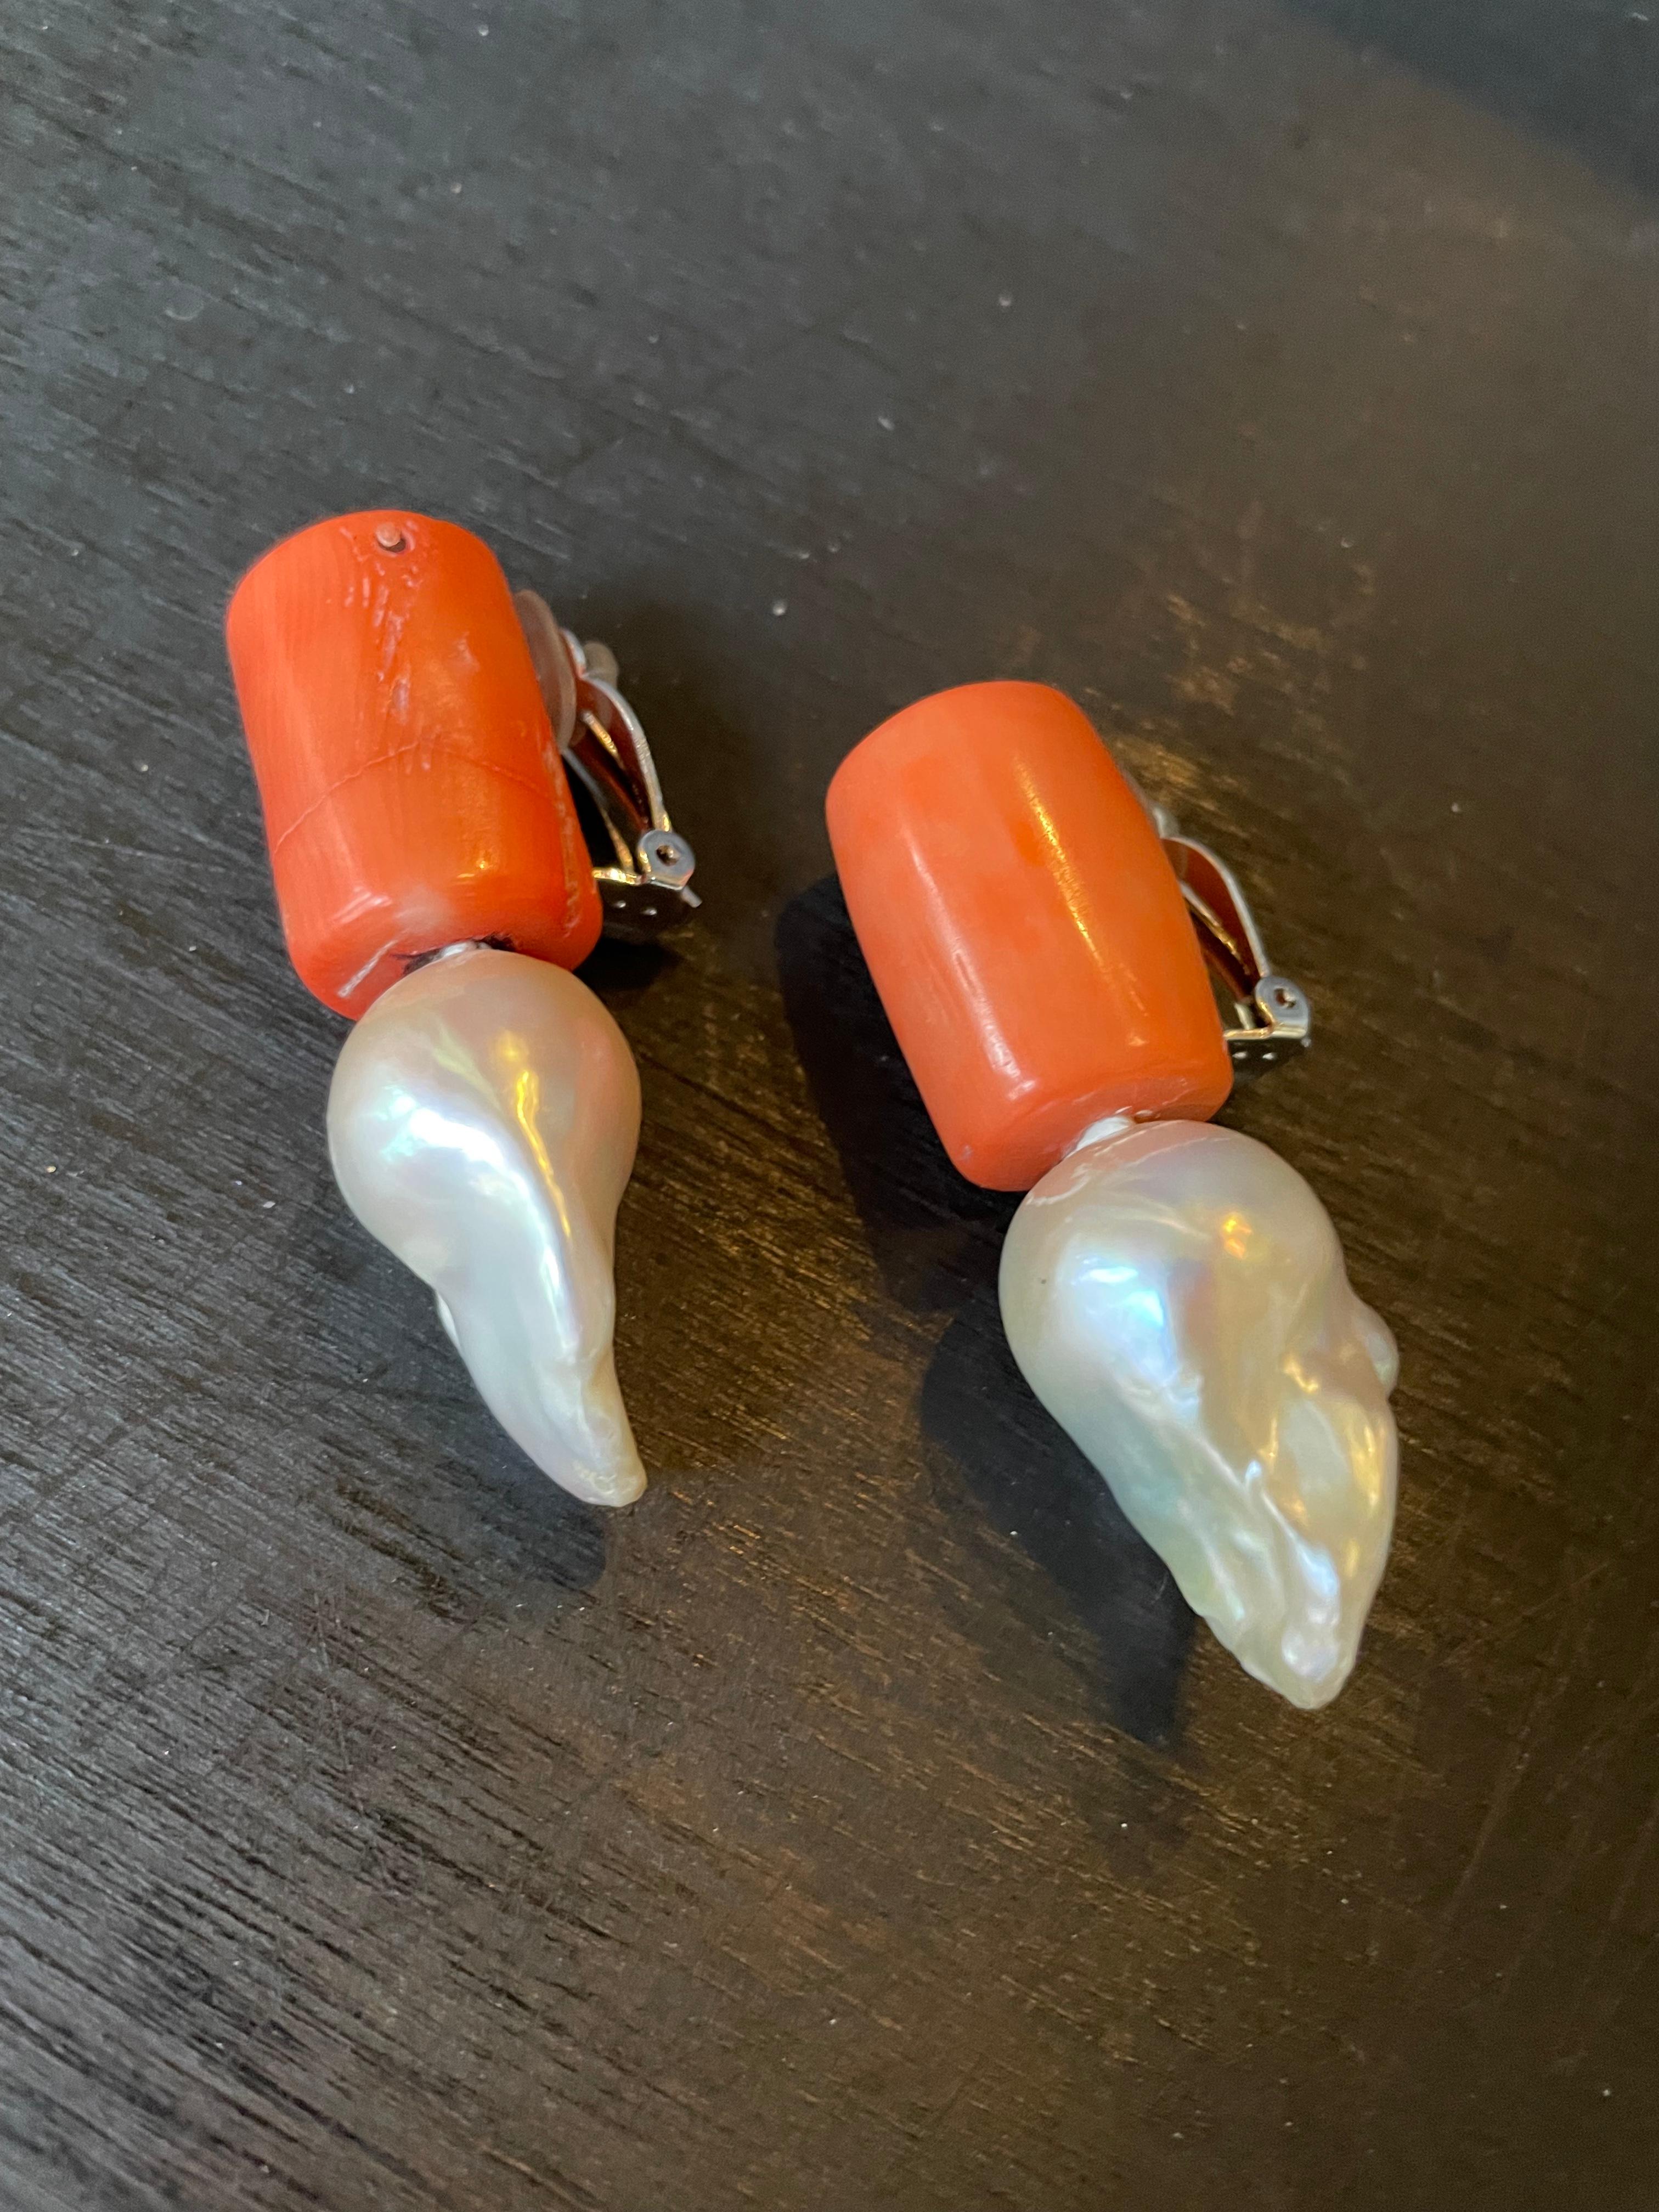 One-of-a-kind statement earrings from the Danish jewellery brand, Monies. 
Made in Coral and Baroque Pearls with a clip-on in sterling silver. 

Handcrafted in the Monies Atelier in Copenhagen.